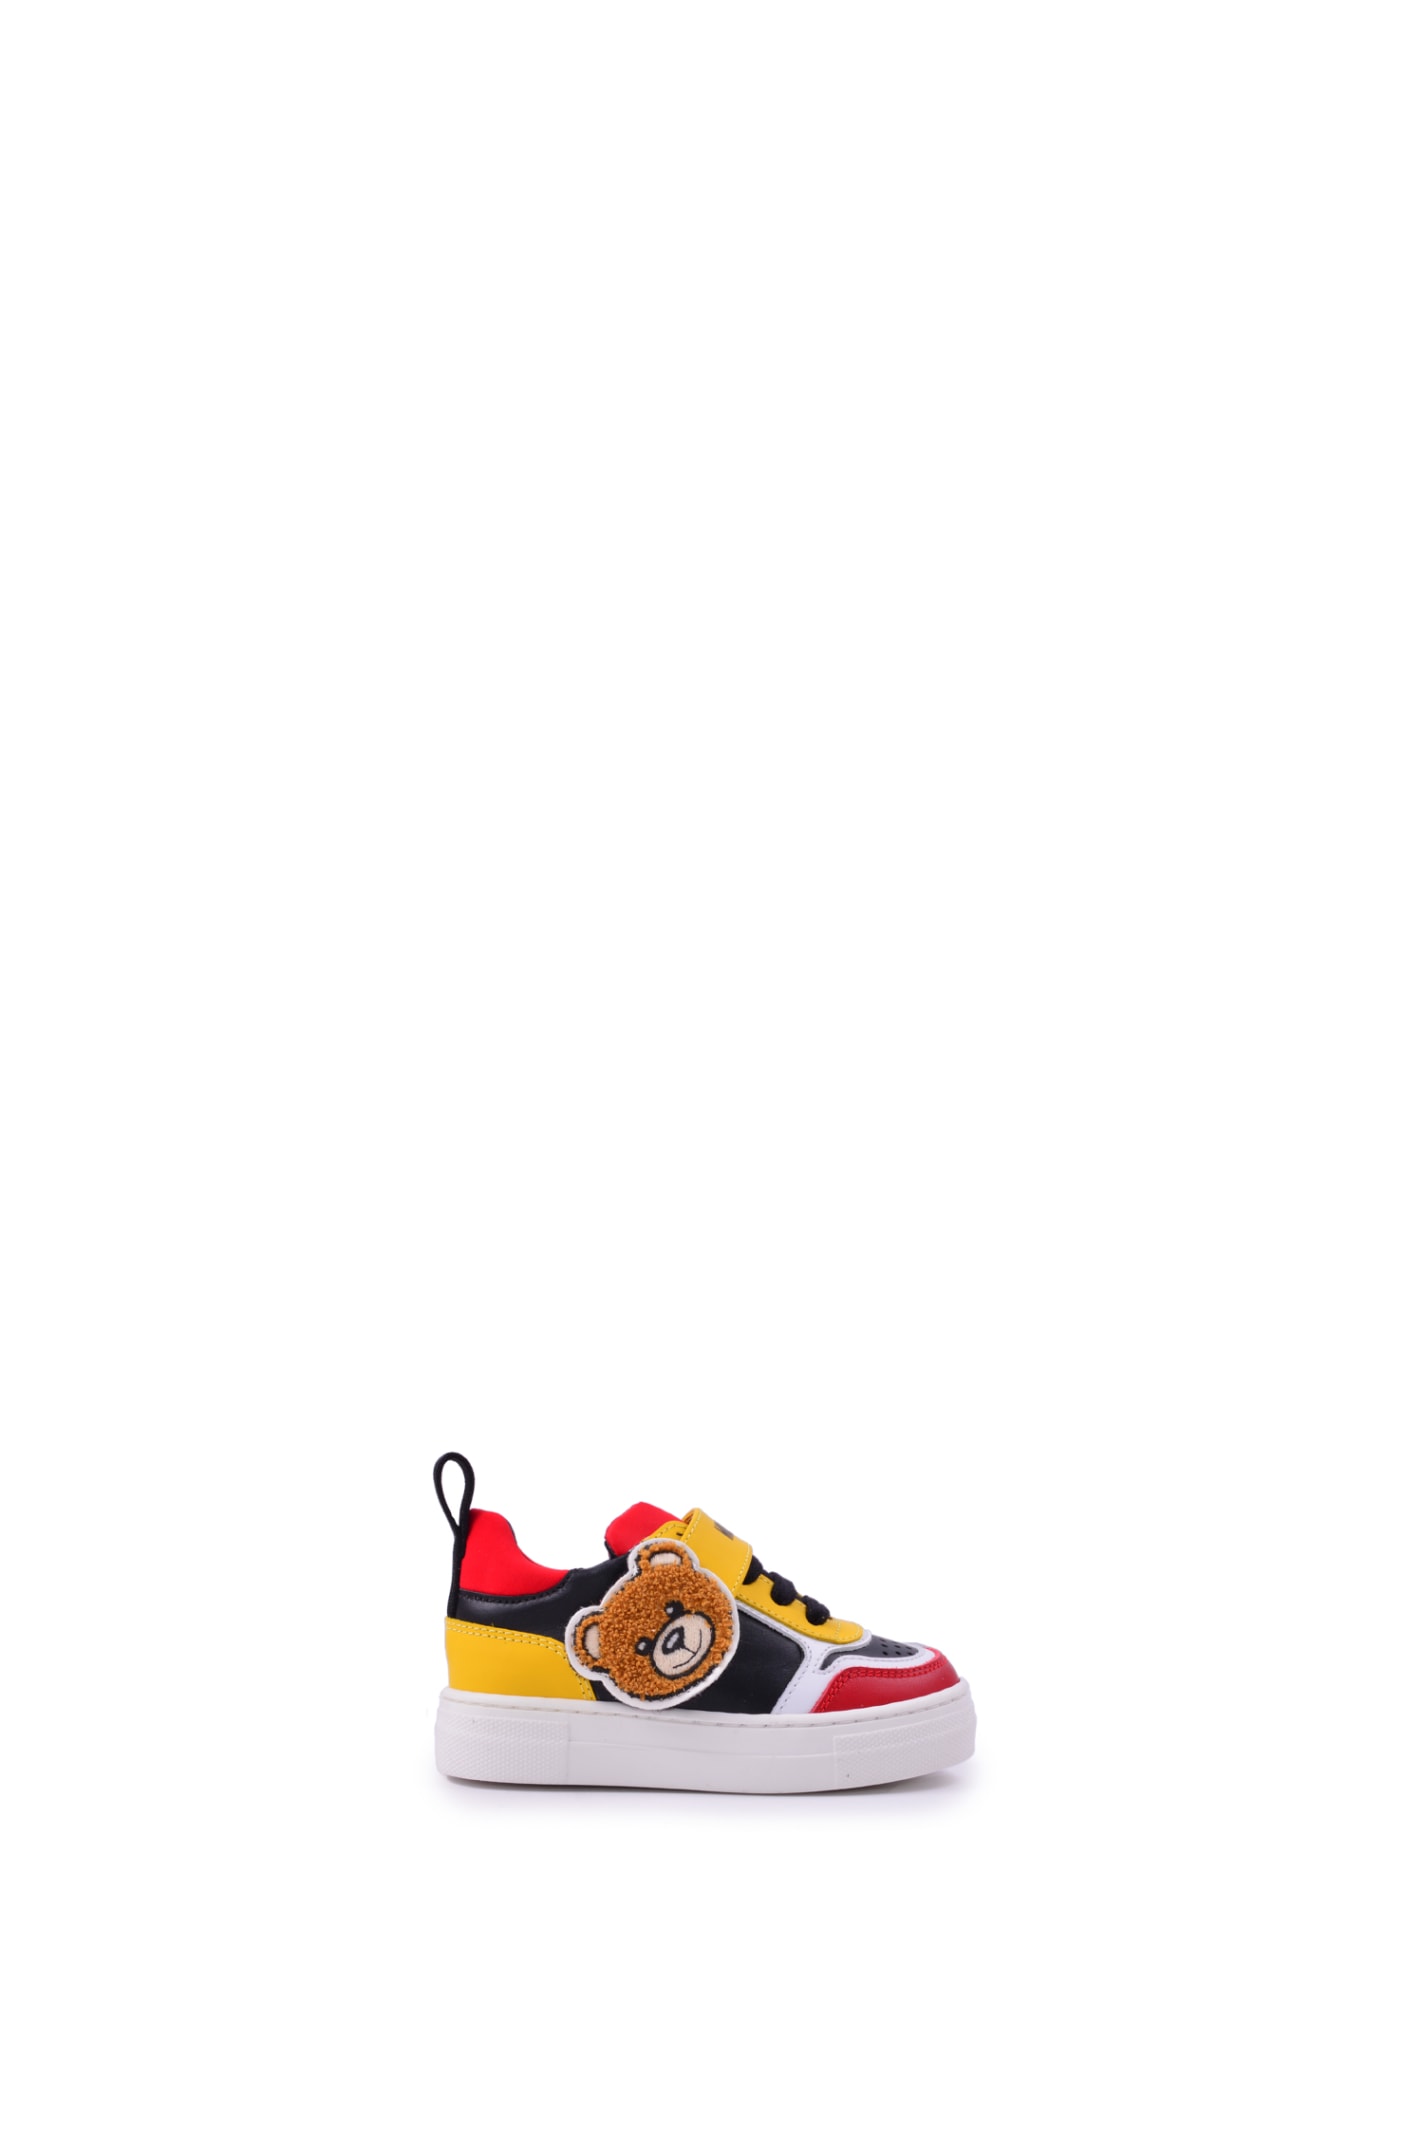 Moschino Leather Sneaker With Tear